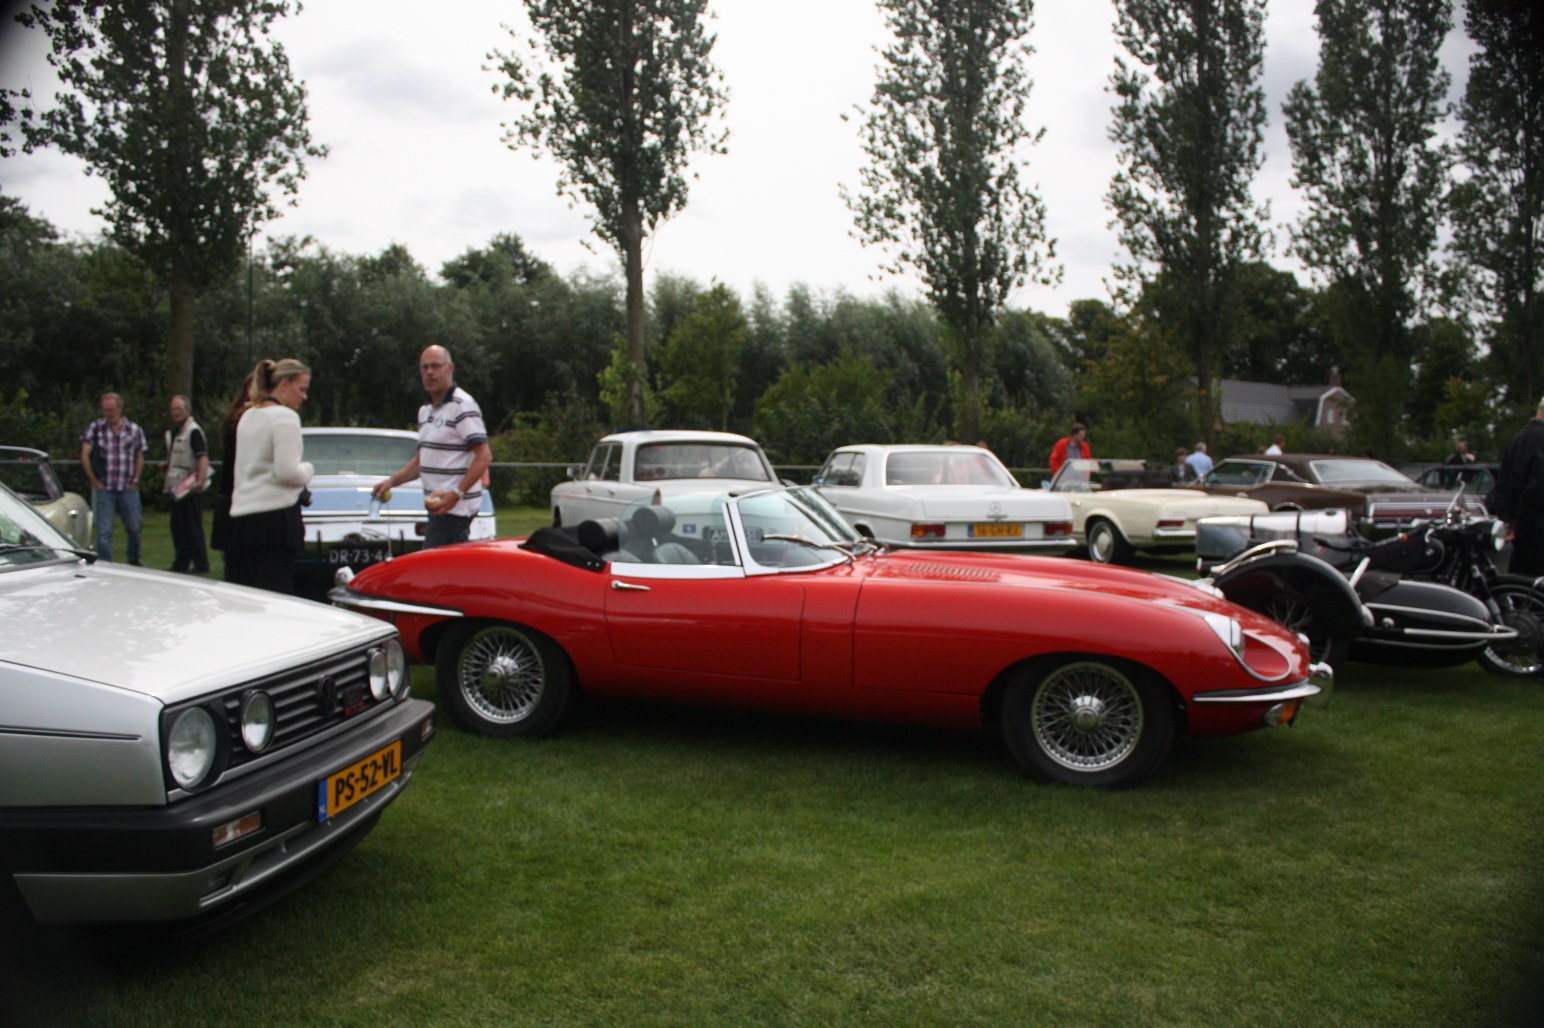 many vintage cars are on display in the grass